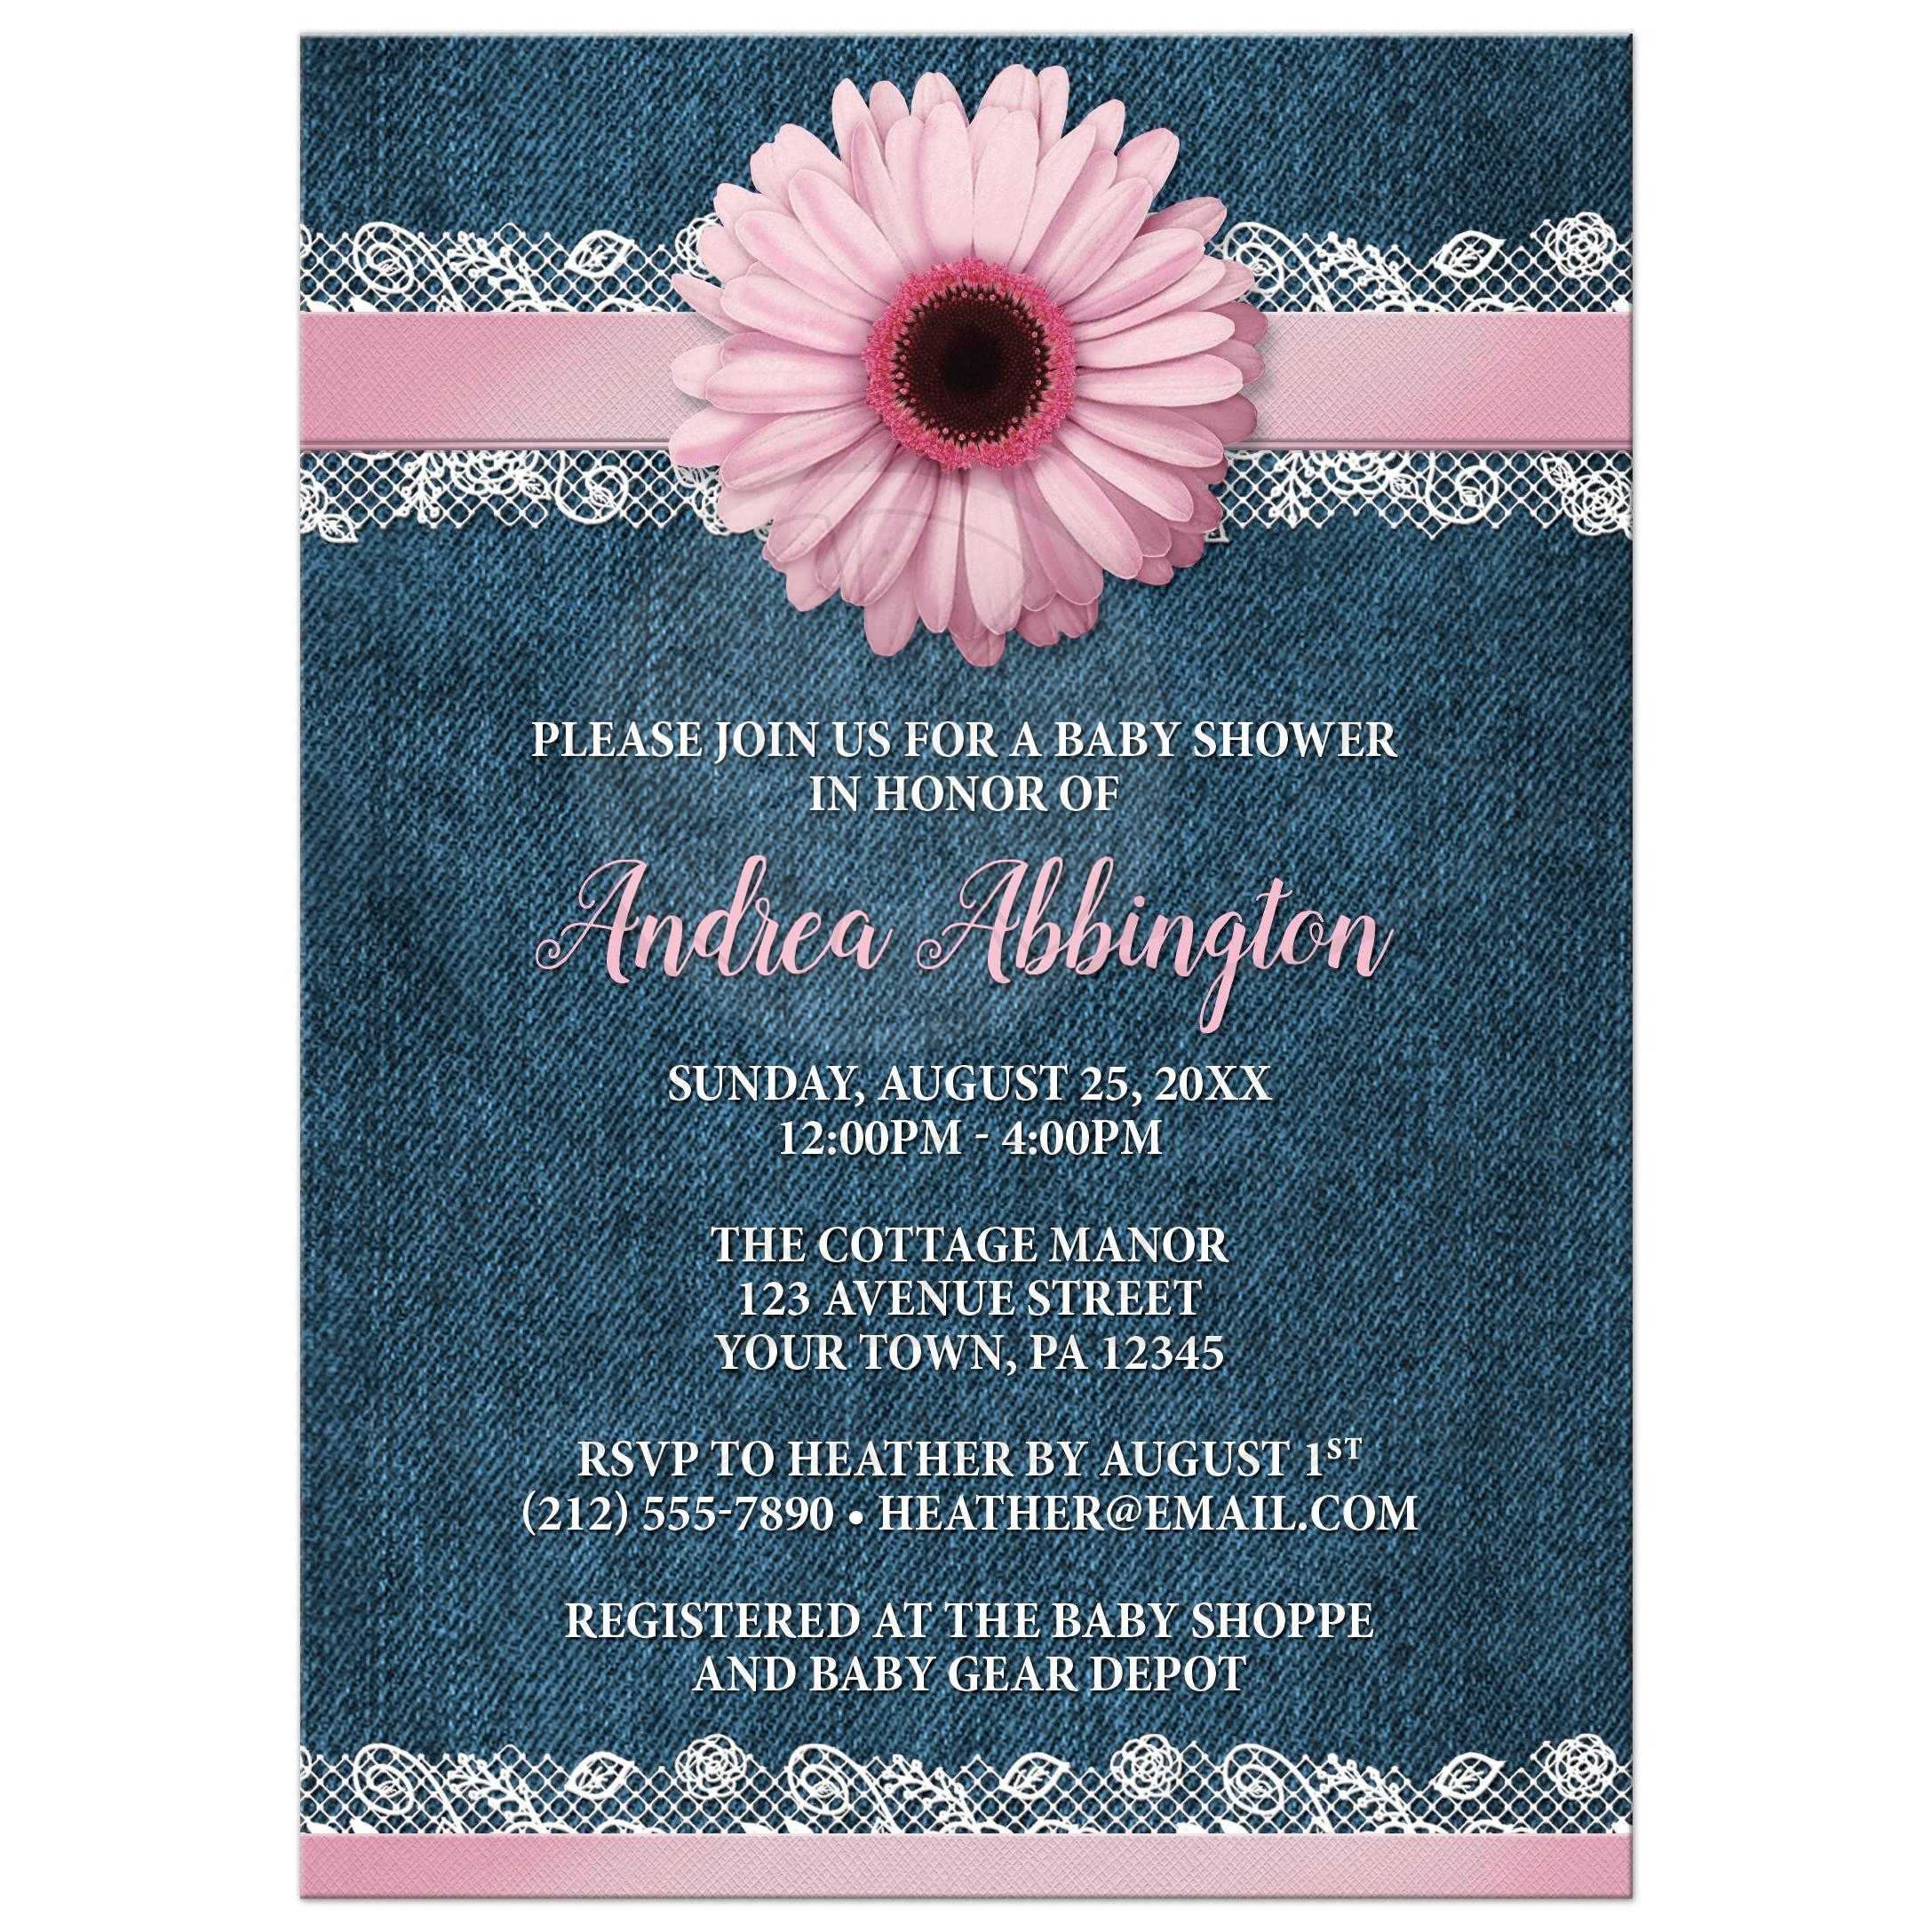 Full Size of Baby Shower:unique Baby Shower Themes Homemade Baby Shower Decorations Baby Shower Invitations Baby Girl Themes Baby Baby Shower Tableware Creative Baby Shower Ideas Free Printable Baby Shower Games Unique Baby Shower Themes